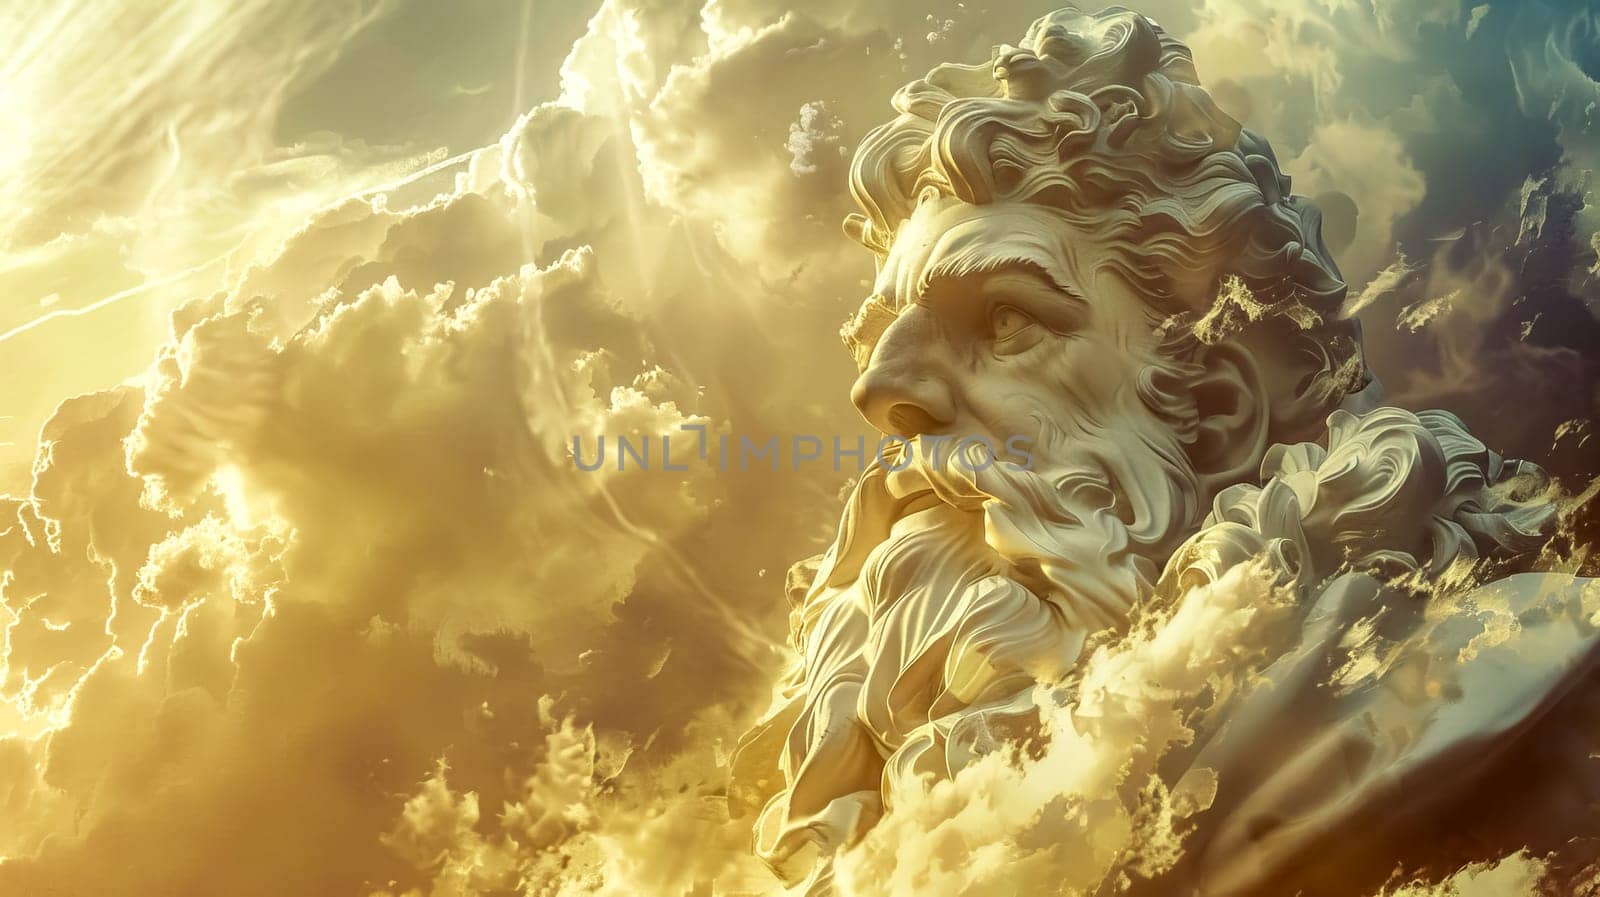 Dramatic depiction of a greek god's face formed by clouds, illuminated by golden sunlight